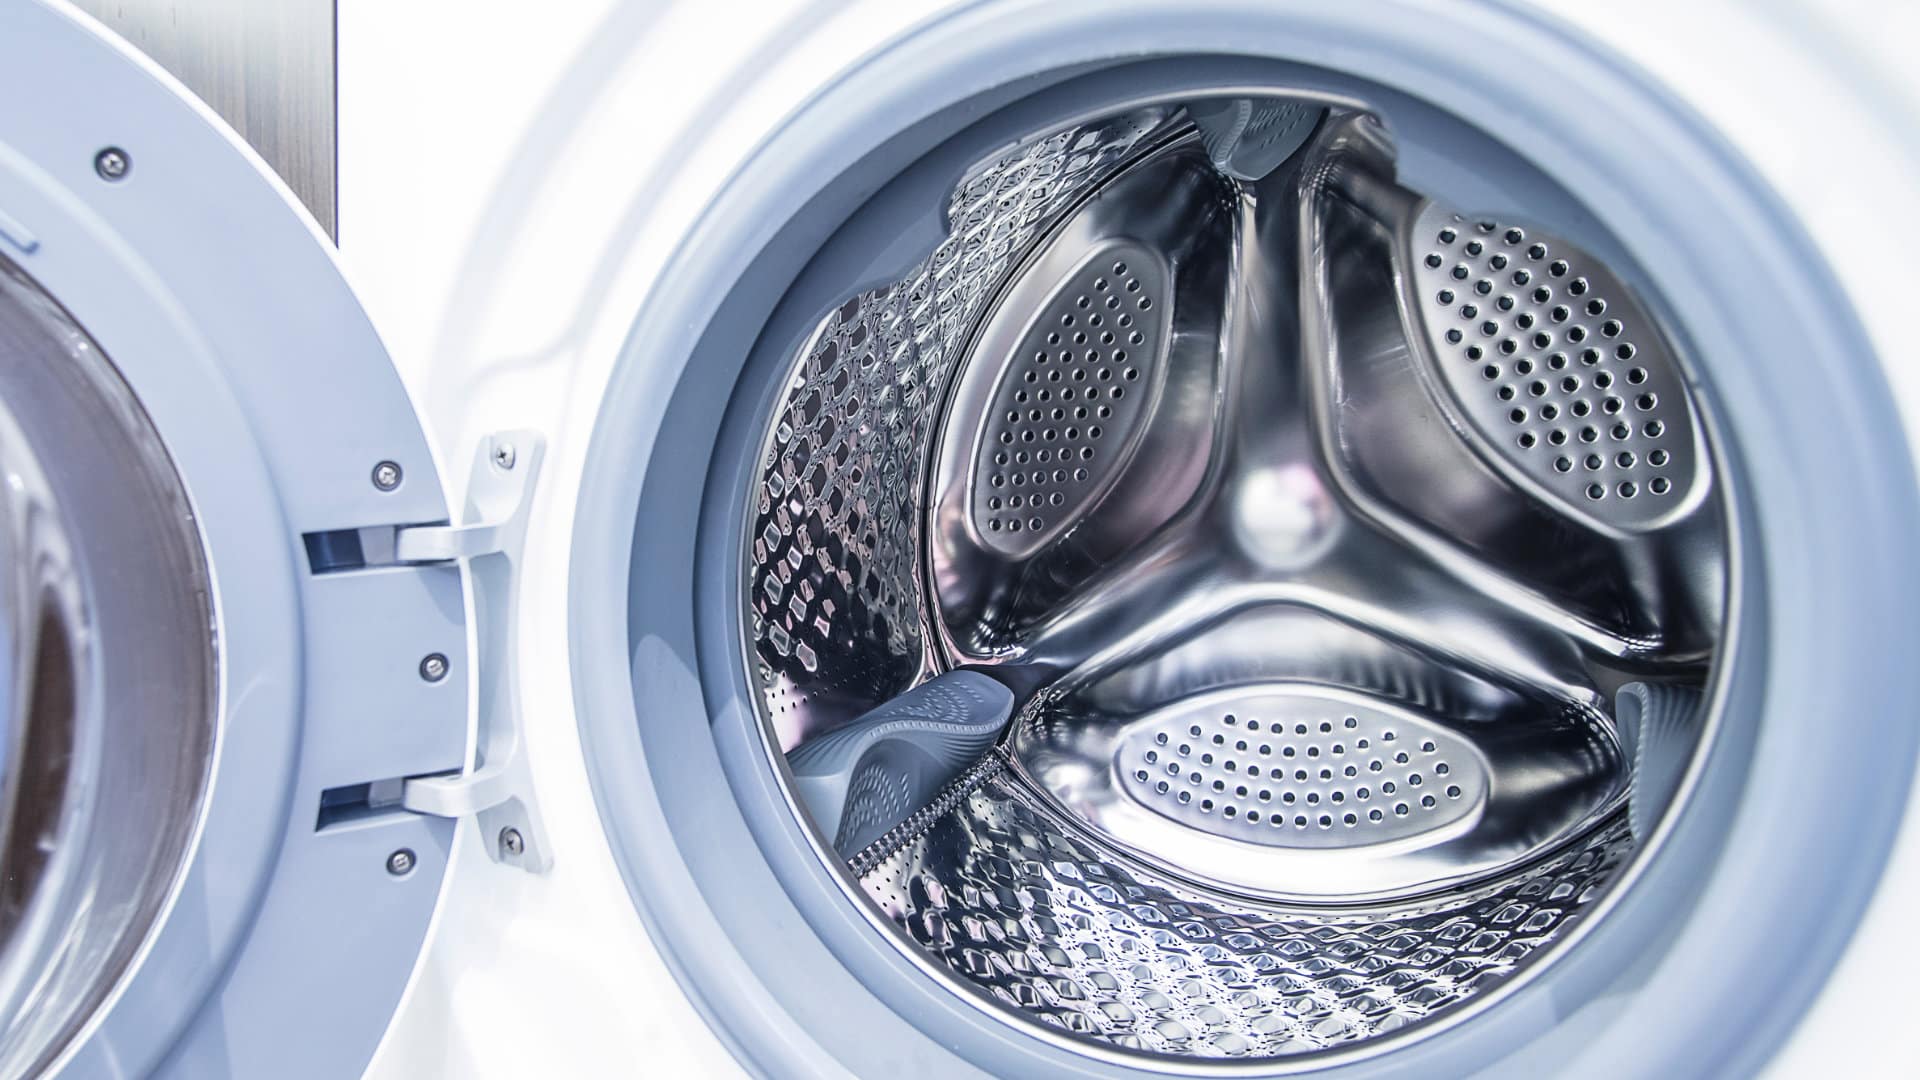 How To Wash Slides In A Washing Machine